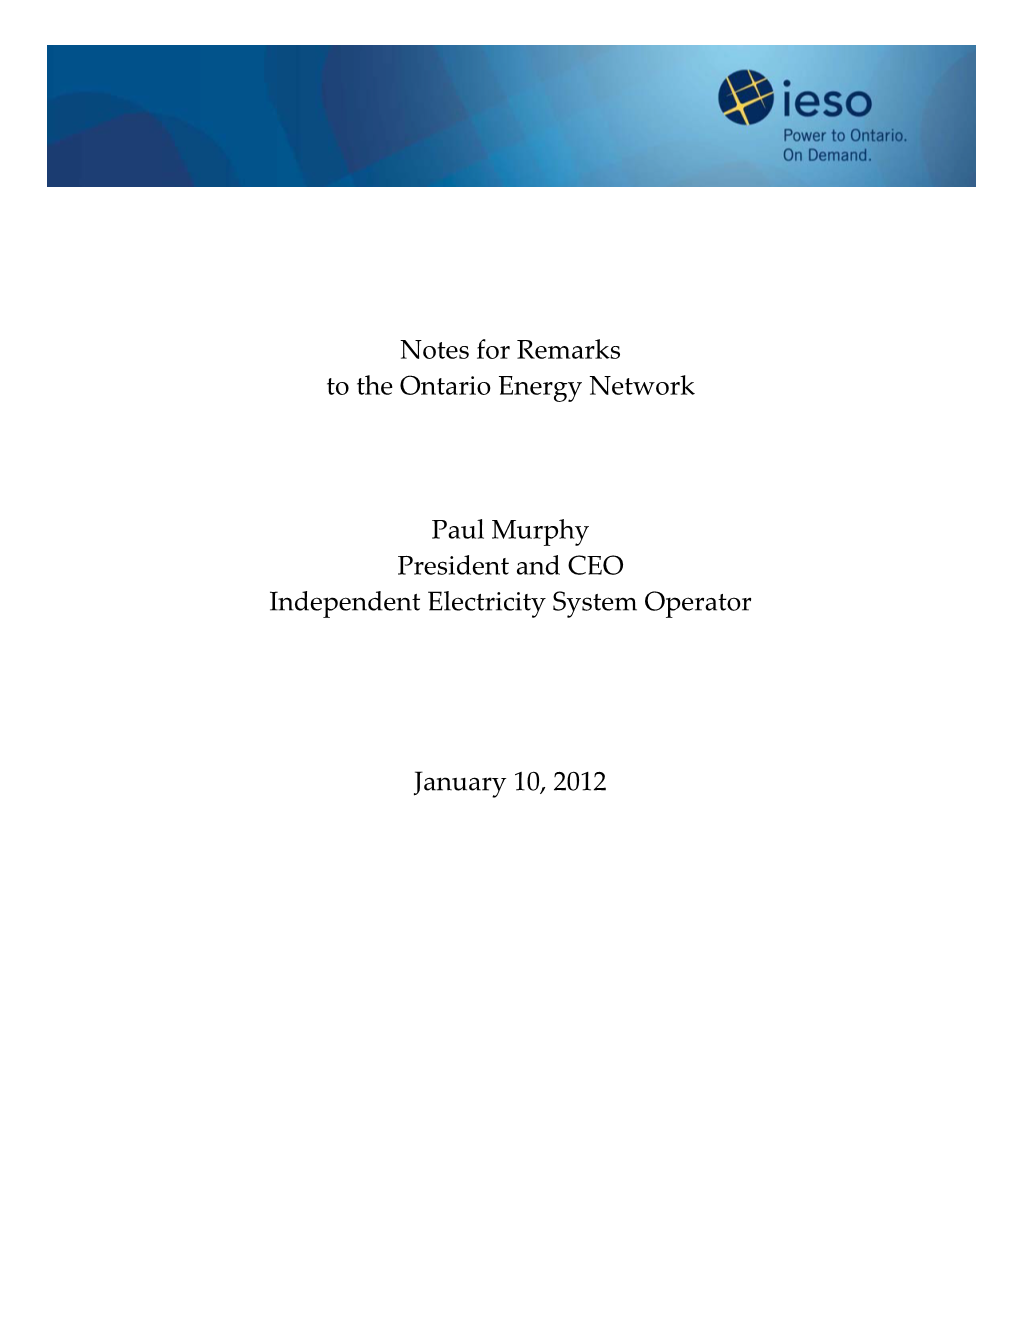 Notes for Remarks to the Ontario Energy Network Paul Murphy